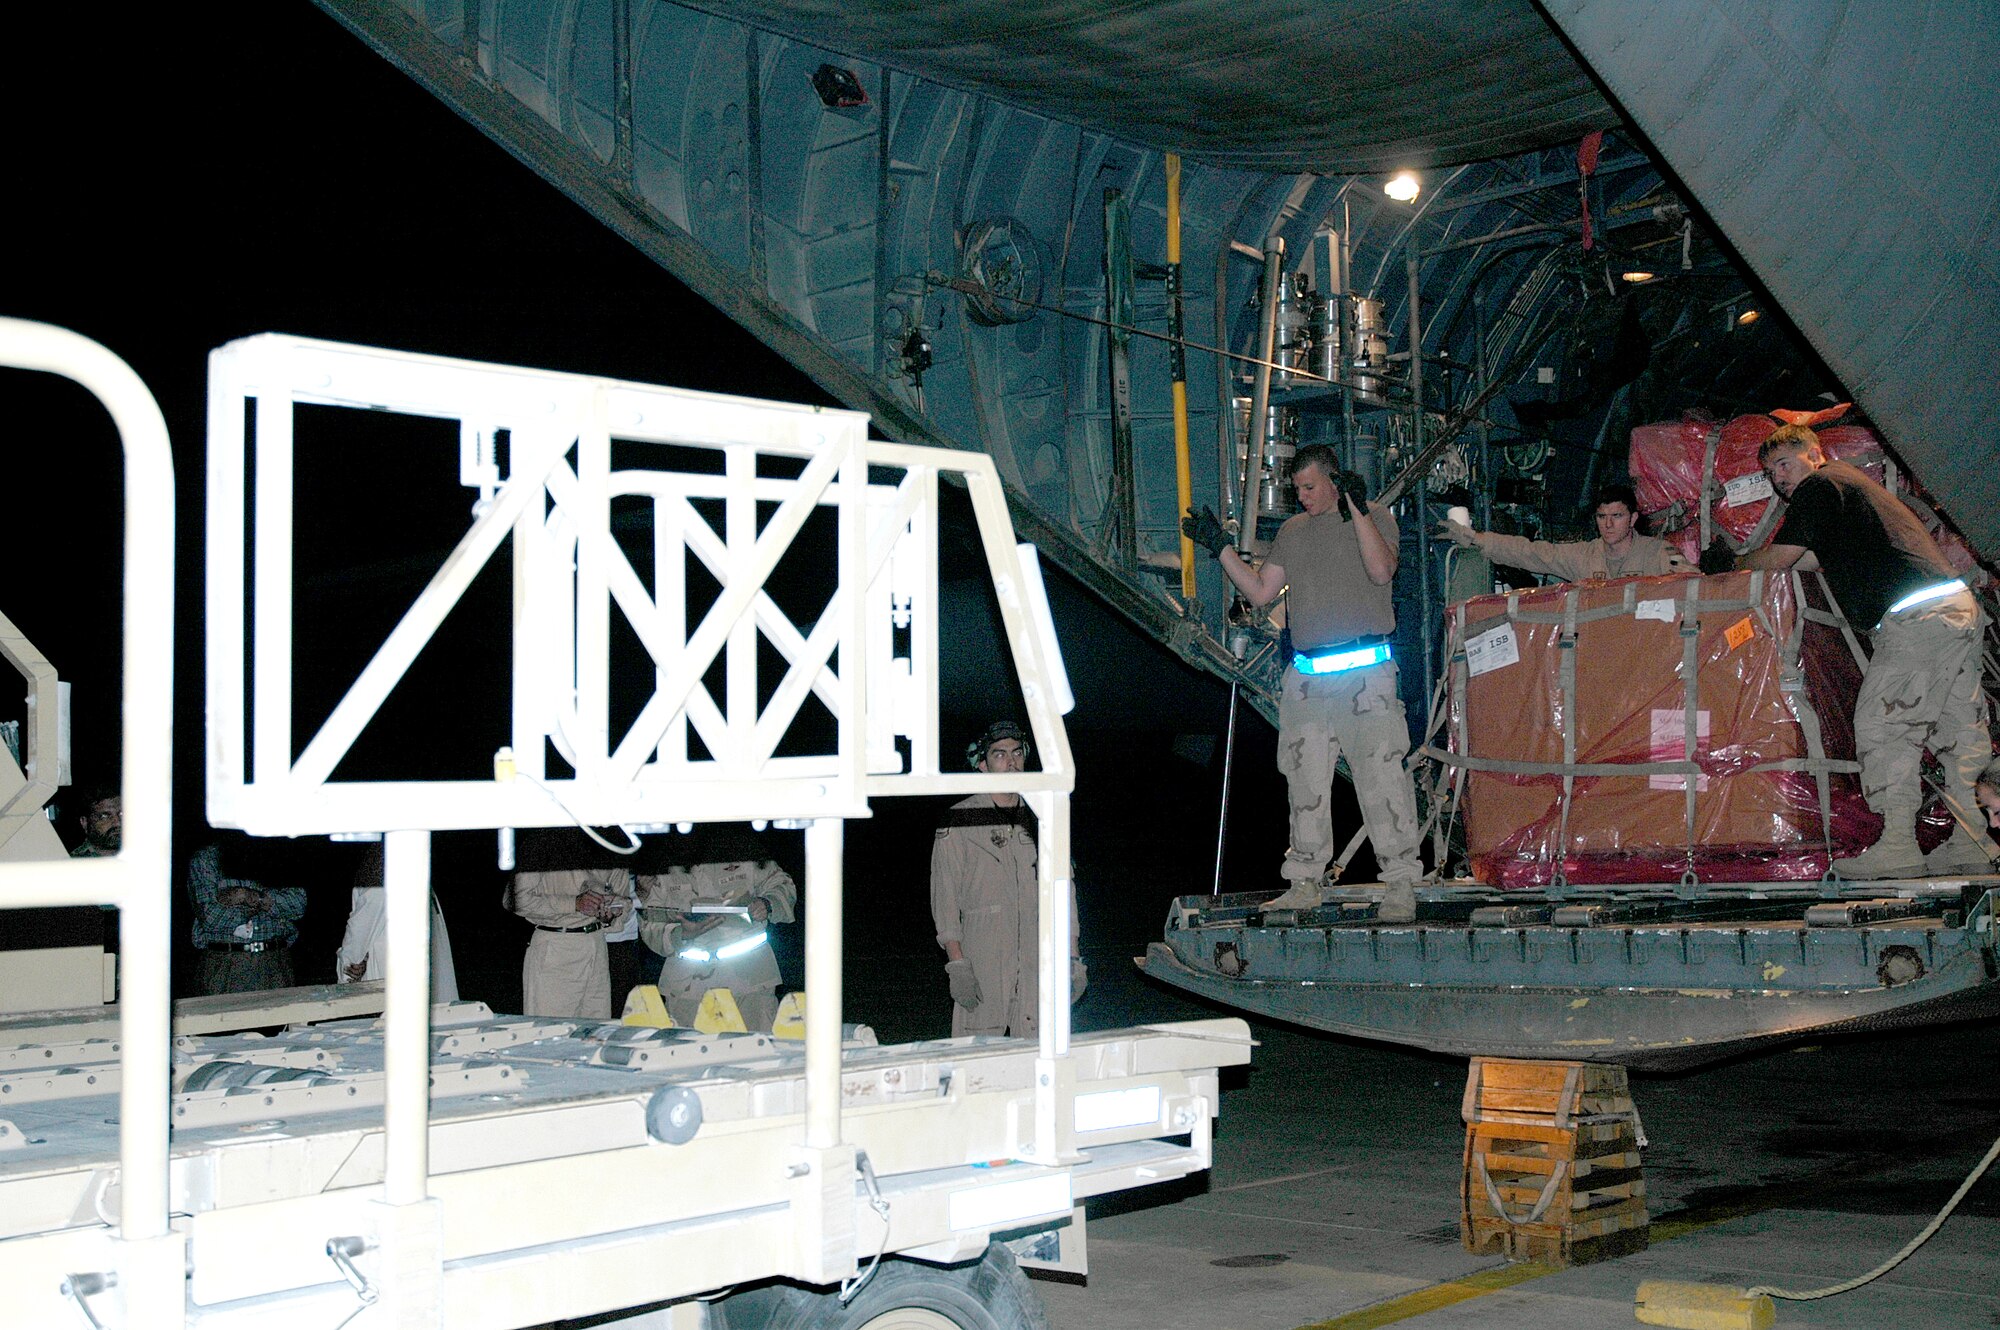 CHAKLALA, Pakistan -- Airmen here transport supplies from a C-130 Hercules to a hangar. The hangar is used to store the tons of relief supplies arriving here to aid the survivors of the massive Oct. 8 earthquake. (U.S. Air Force photo by Senior Airman Cassandra Locke)